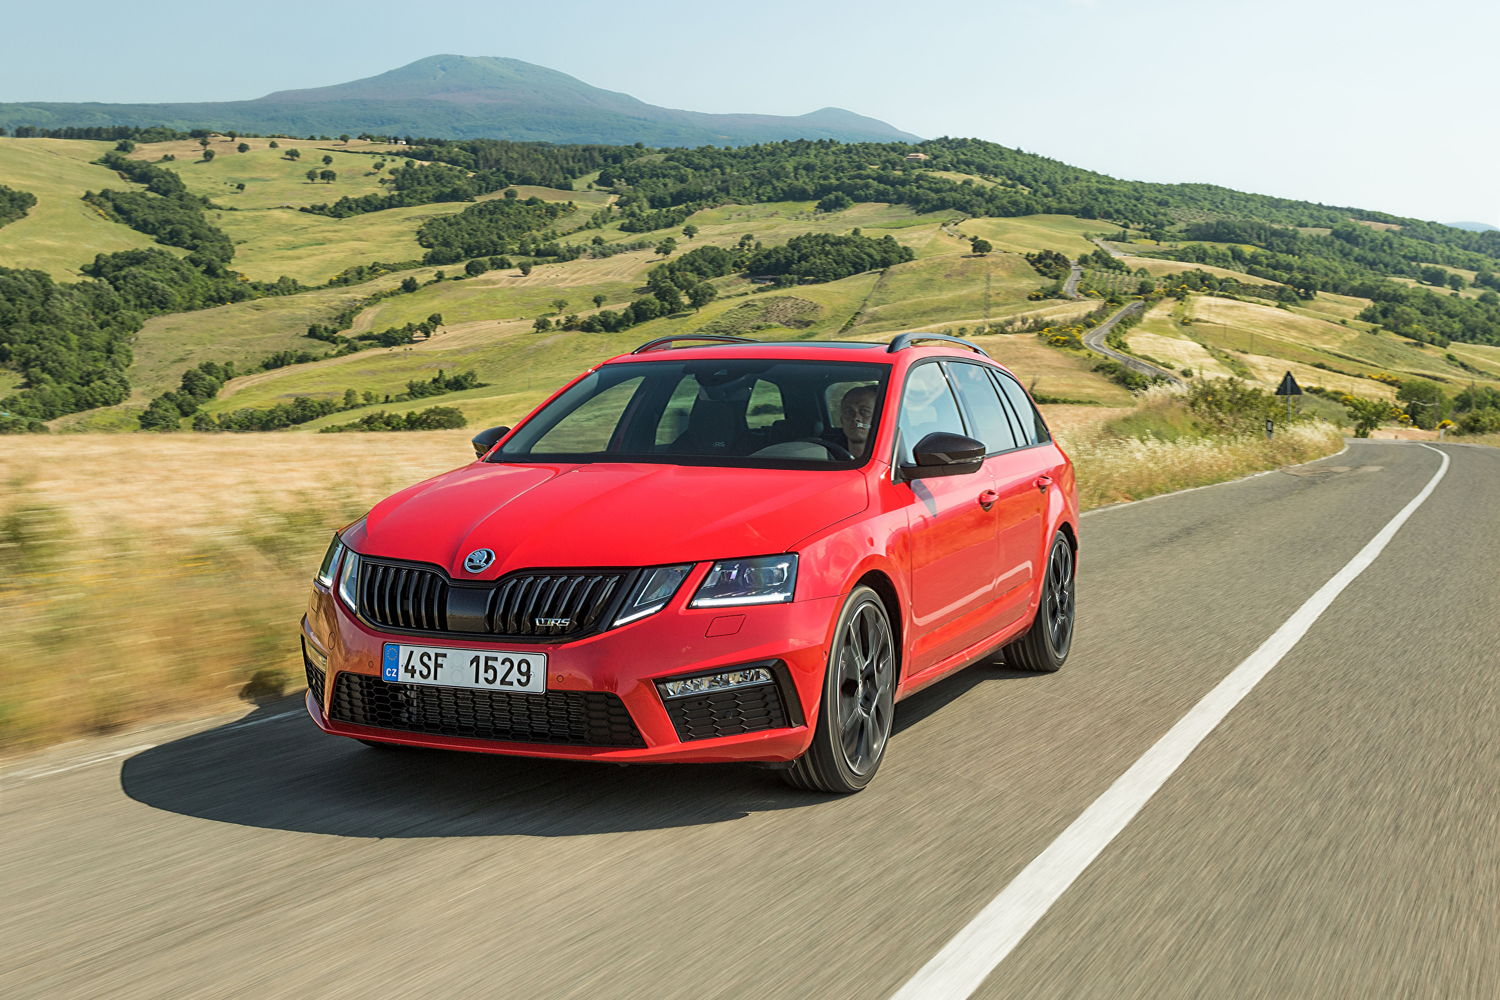 The ŠKODA OCTAVIA COMBI RS 245 features the new face of the brand with particularly sporty details.